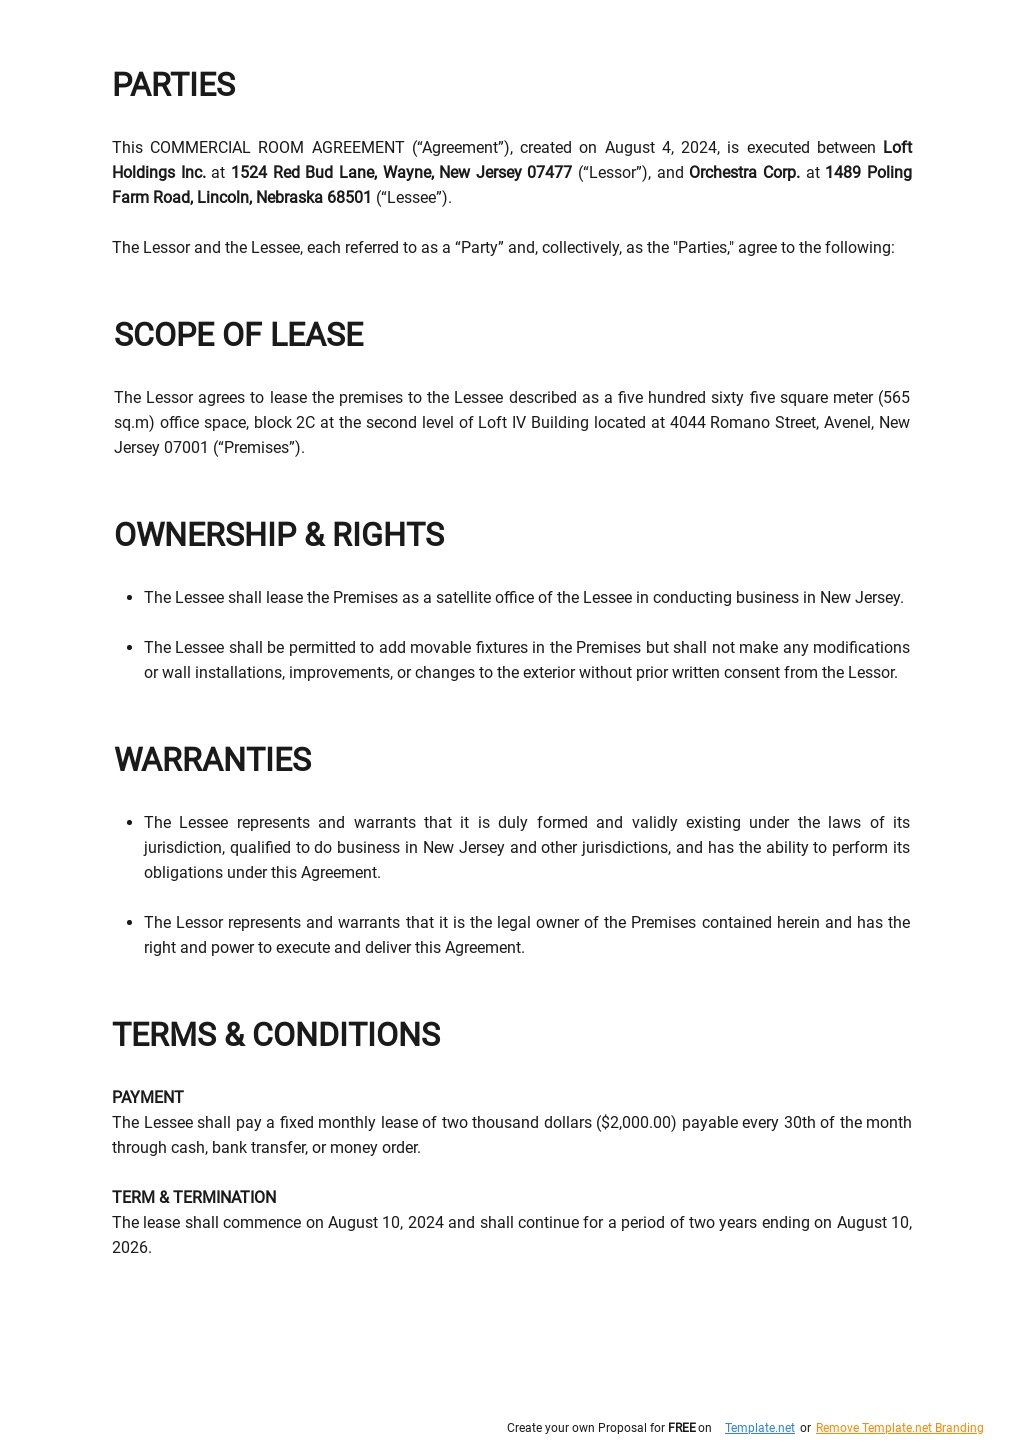 Commercial Room Lease Agreement Template 1.jpe